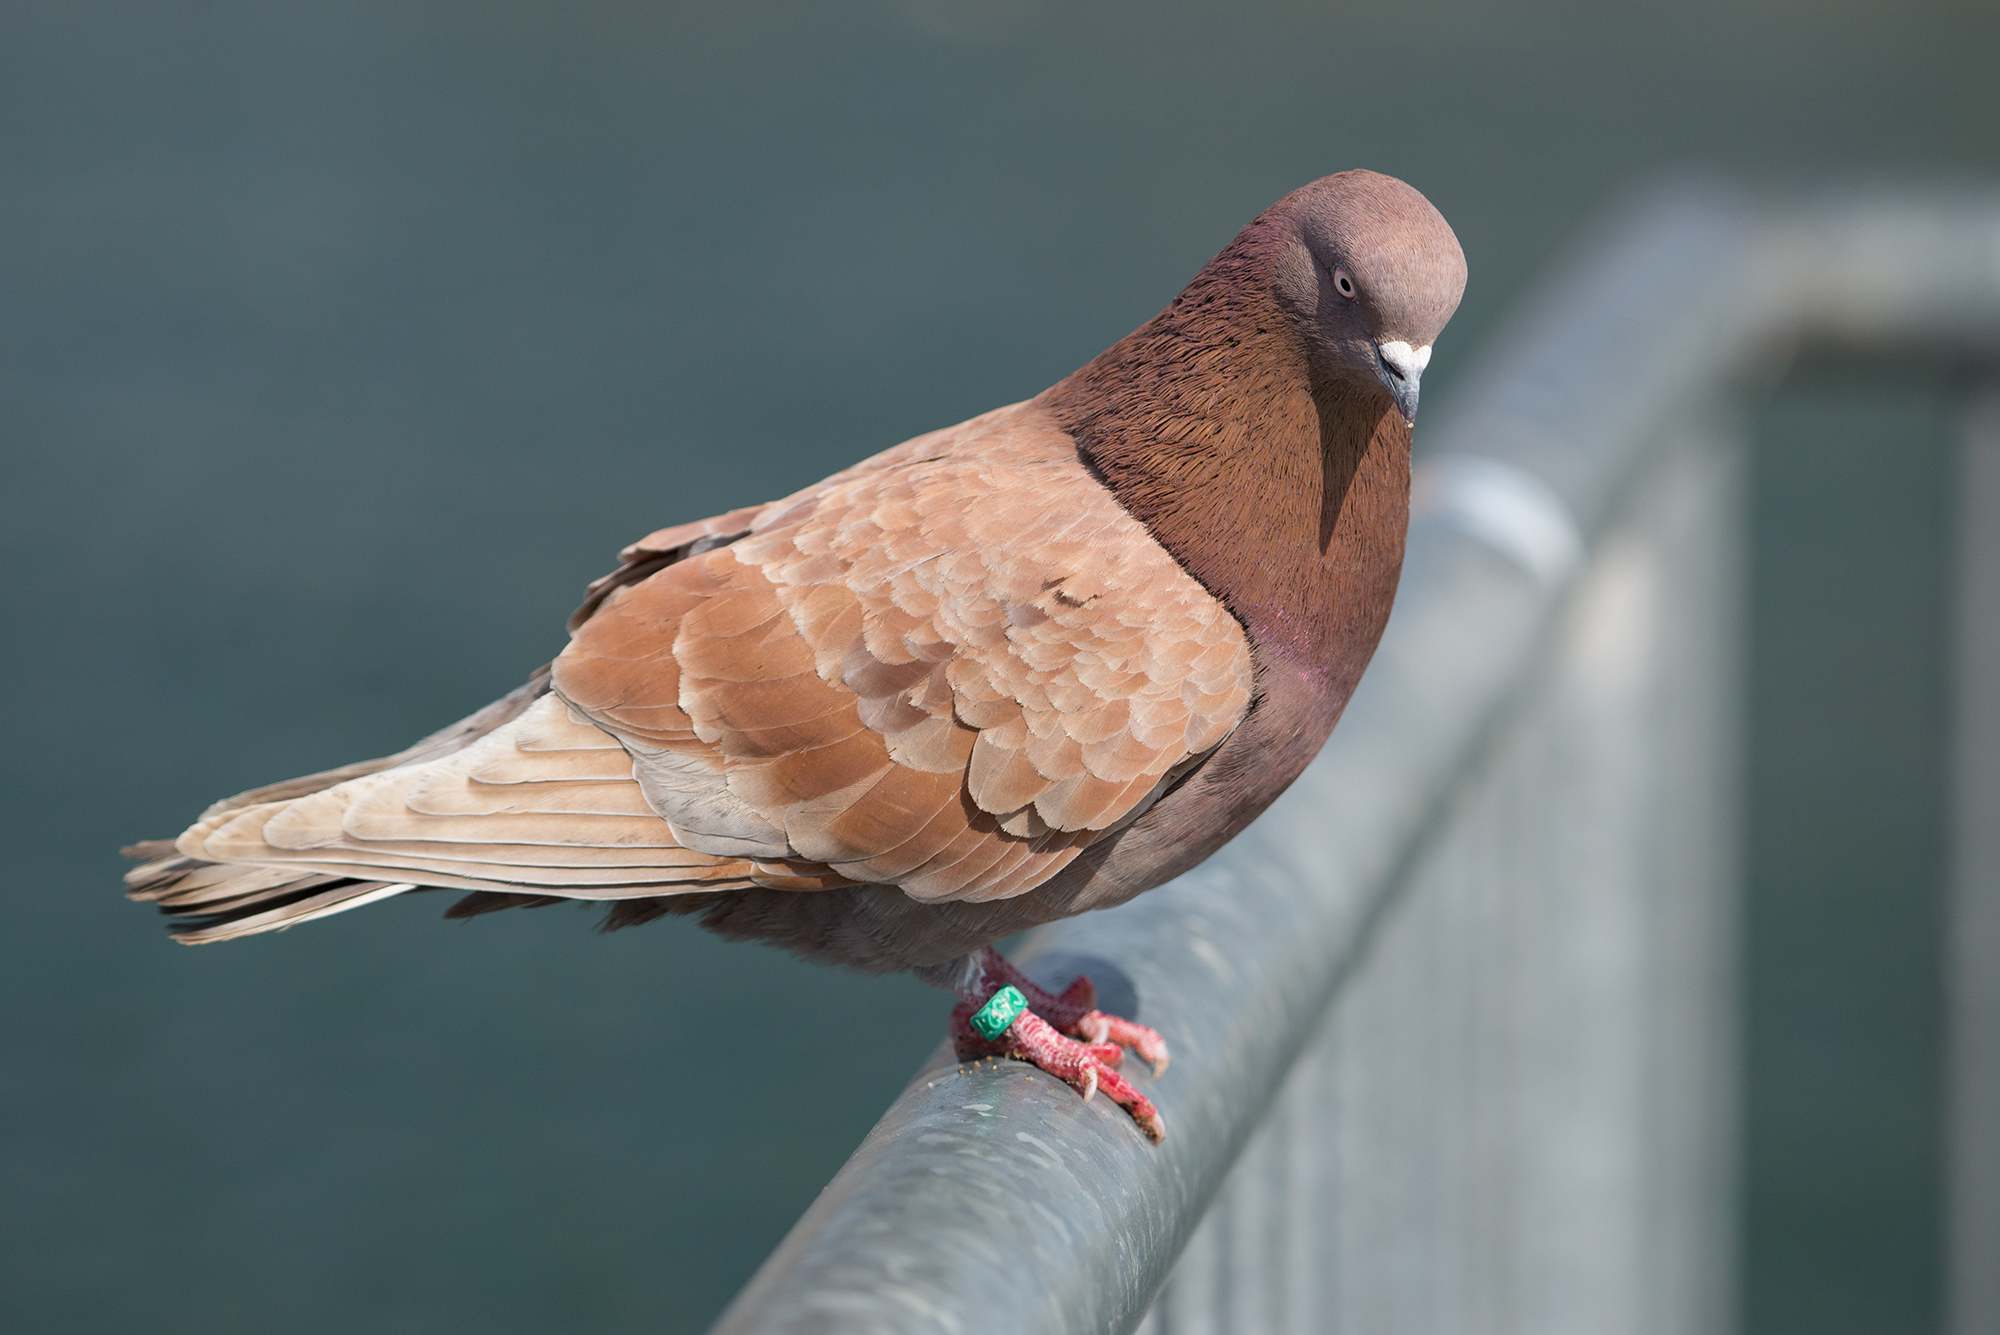 Rust coloured rock pigeon perched on a railing. It has a green identification band on one foot.